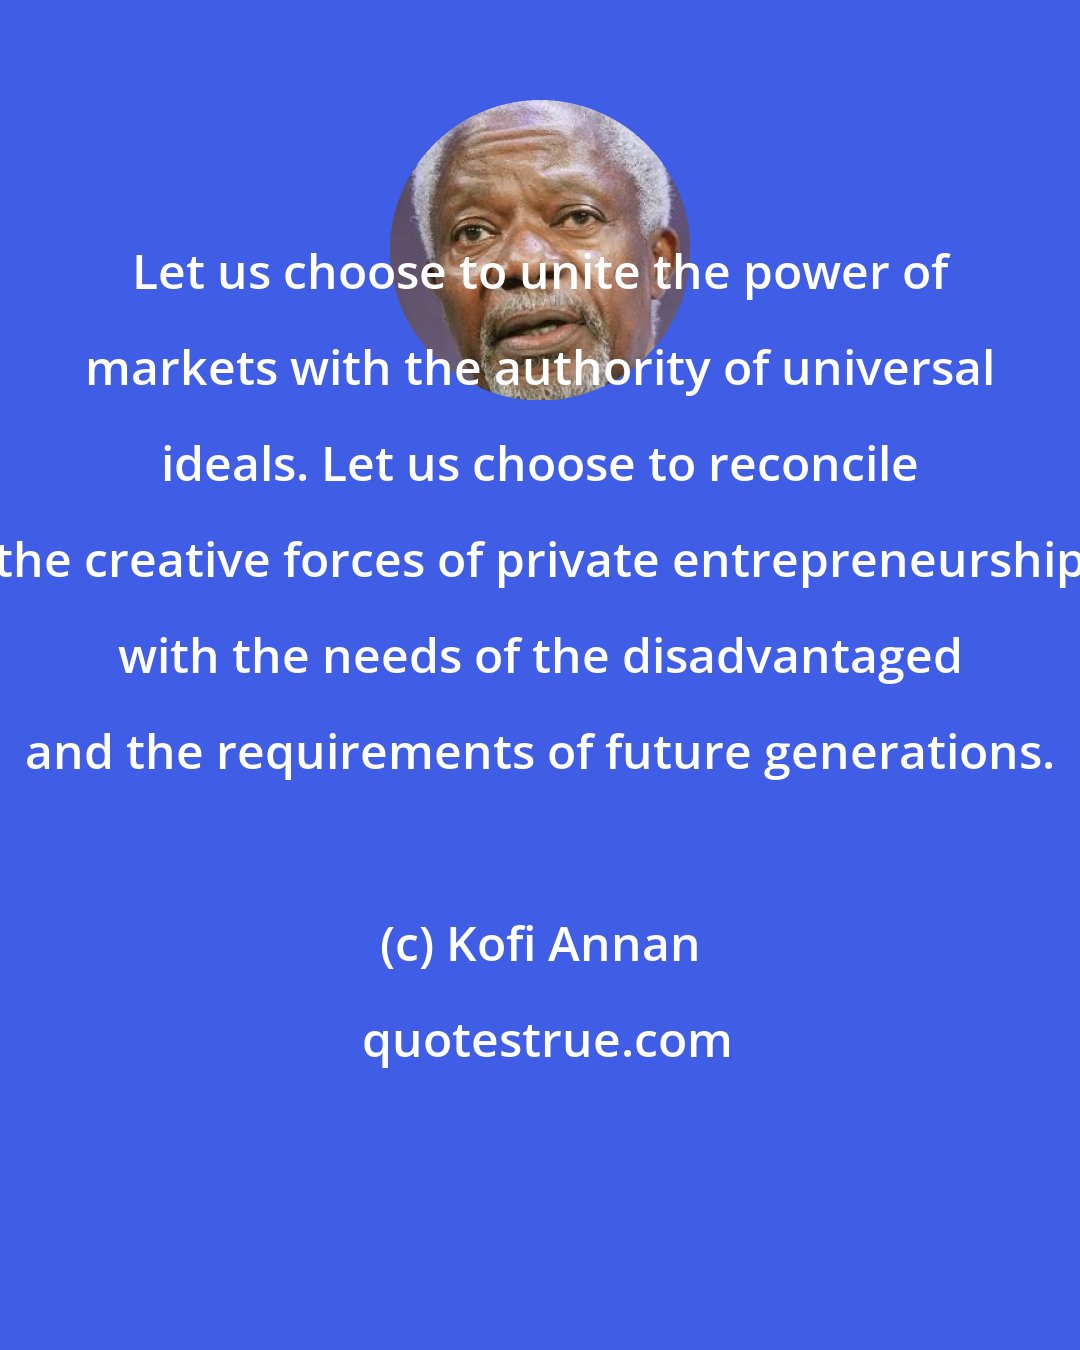 Kofi Annan: Let us choose to unite the power of markets with the authority of universal ideals. Let us choose to reconcile the creative forces of private entrepreneurship with the needs of the disadvantaged and the requirements of future generations.